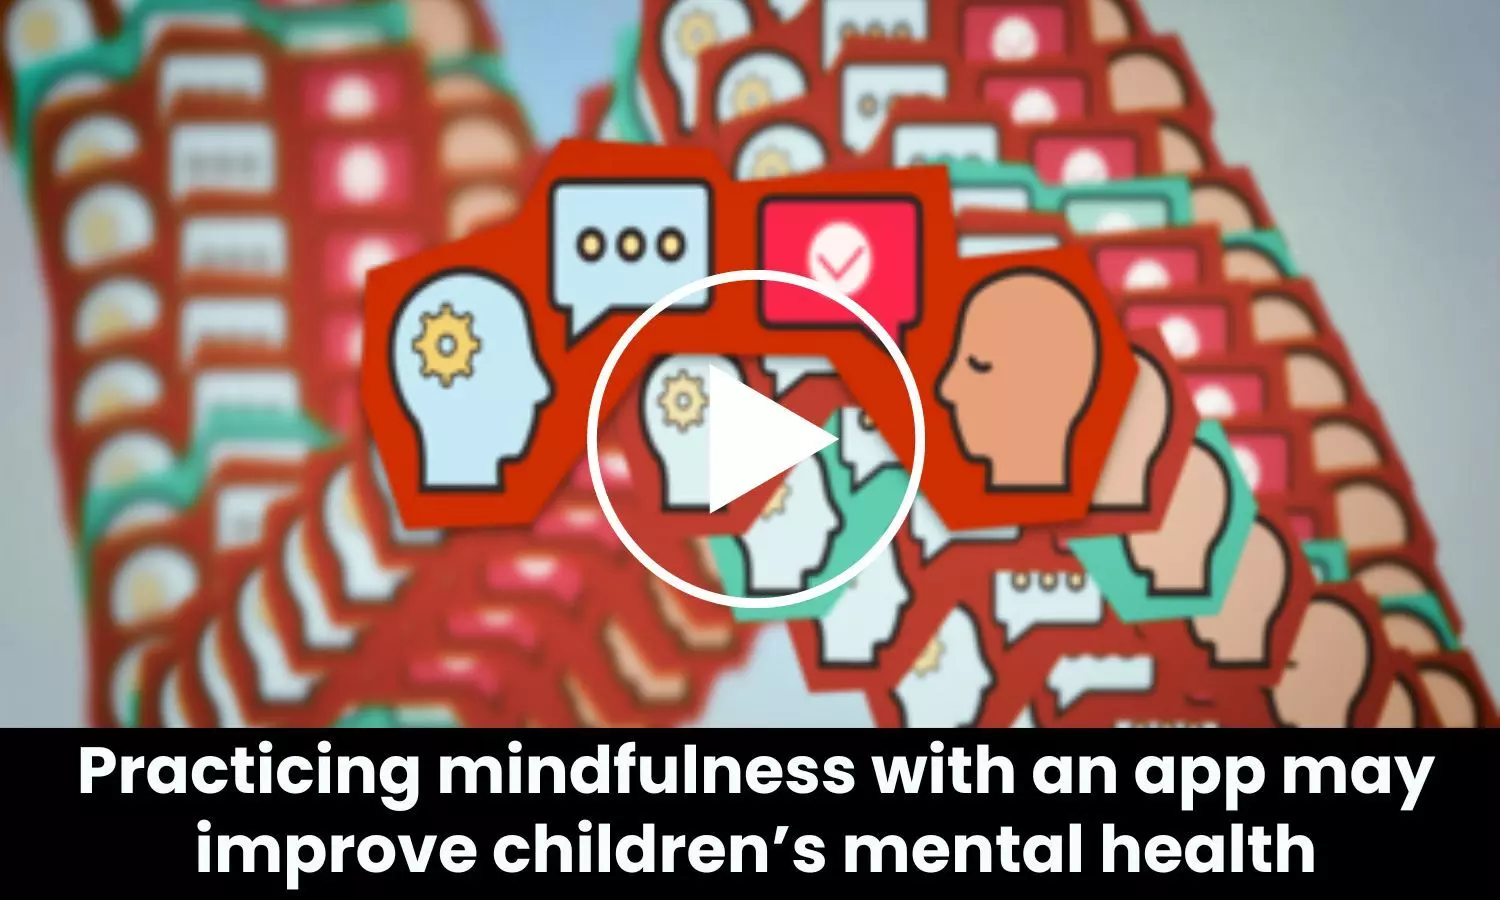 Practicing mindfulness with an app may improve children’s mental health